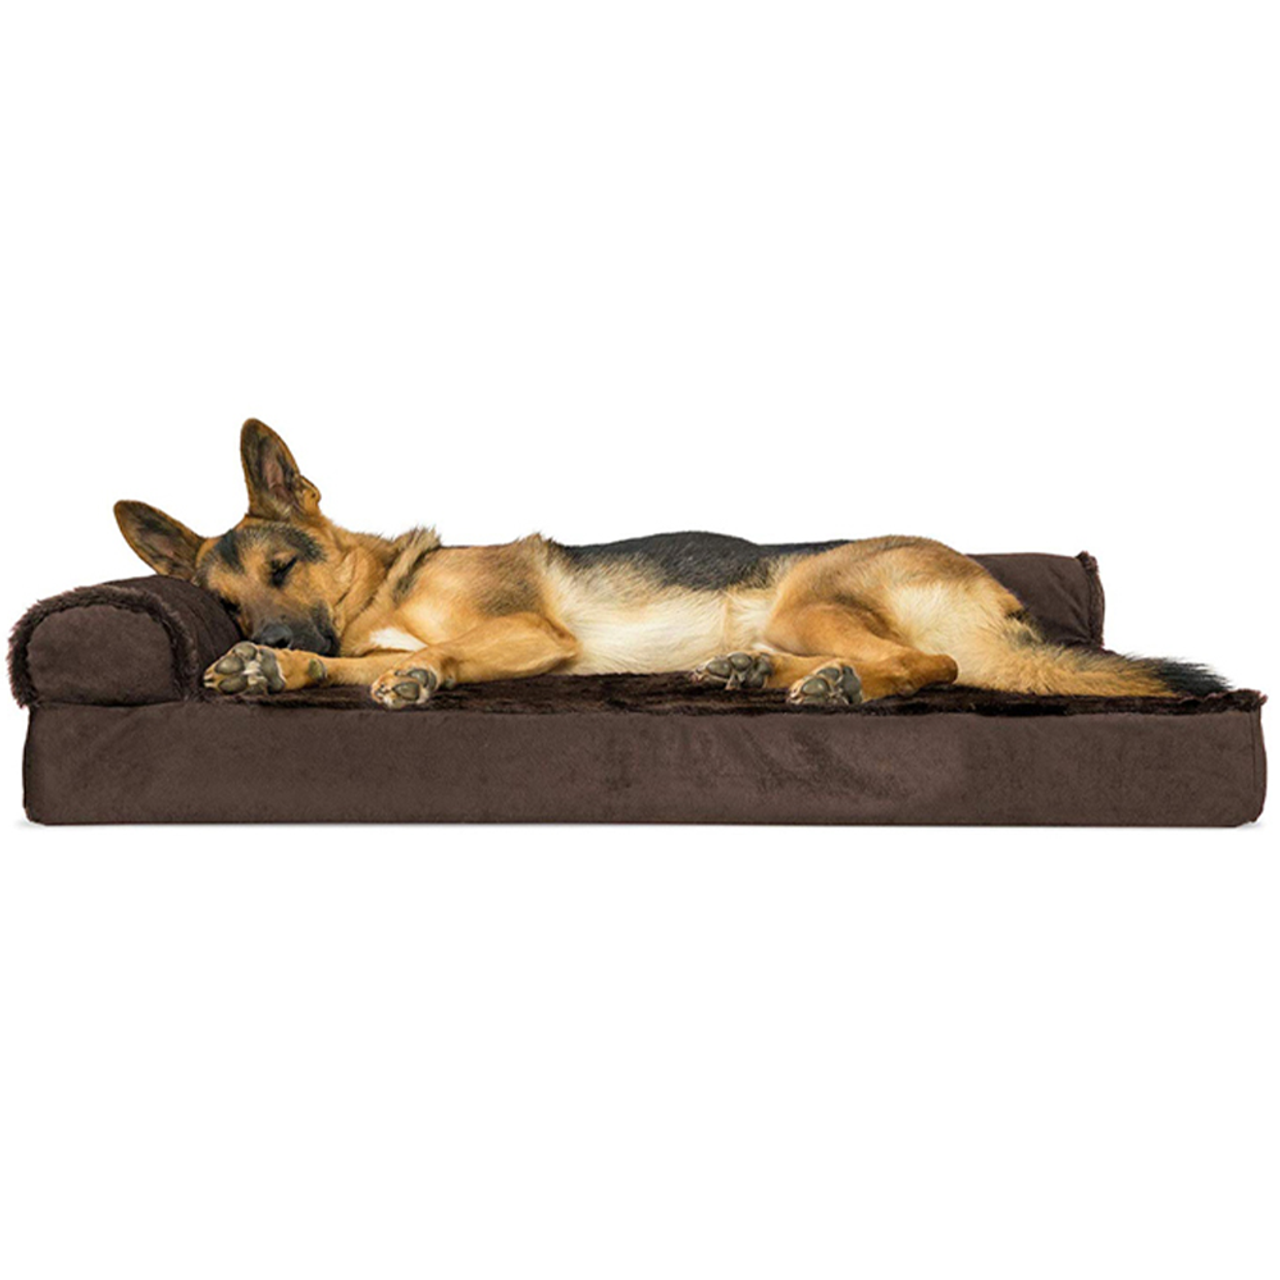 Plush & Velvet Deluxe Chaise Lounge Orthopedic Pet Bed product image